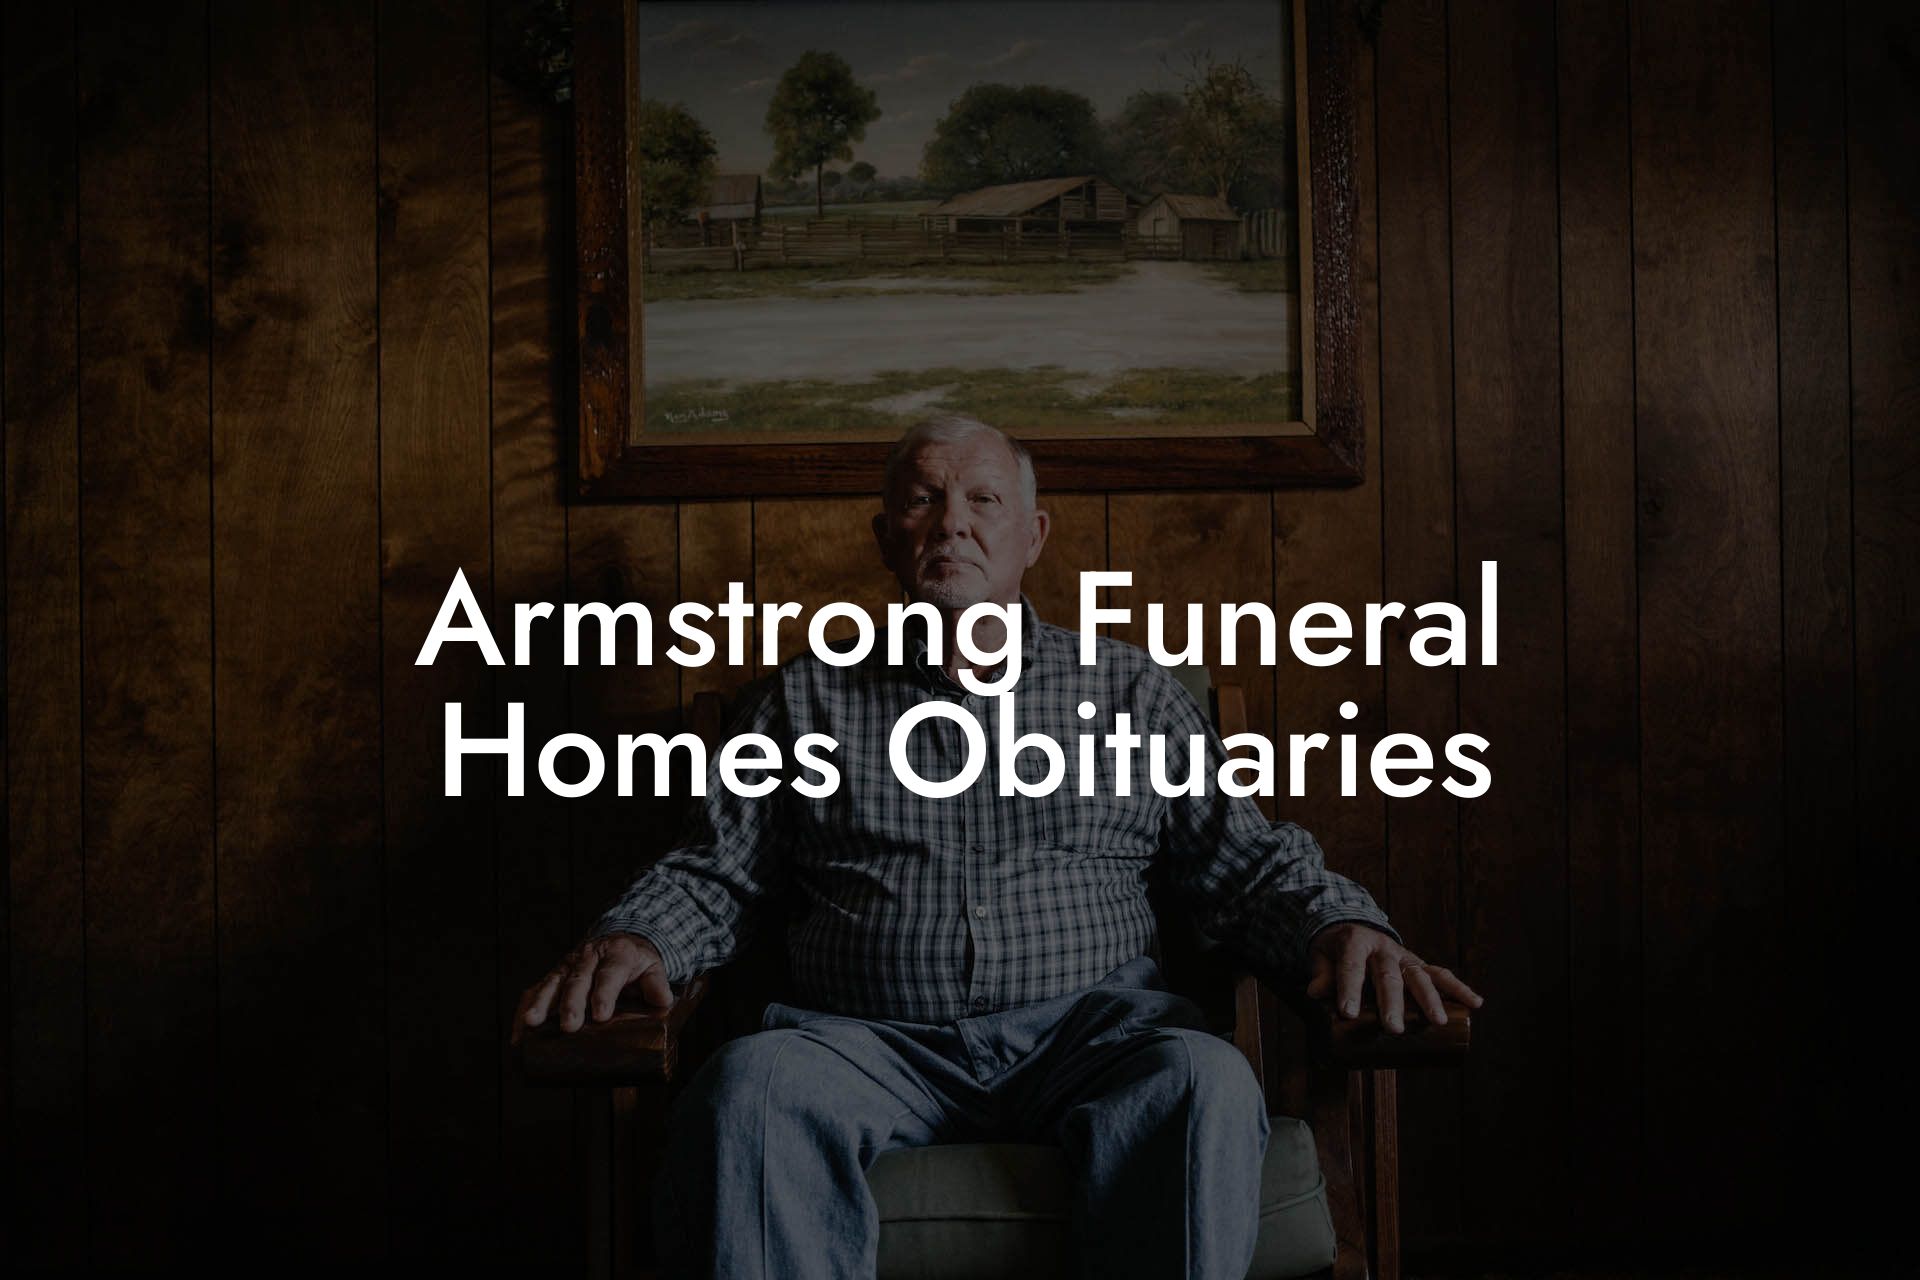 Armstrong Funeral Homes Obituaries